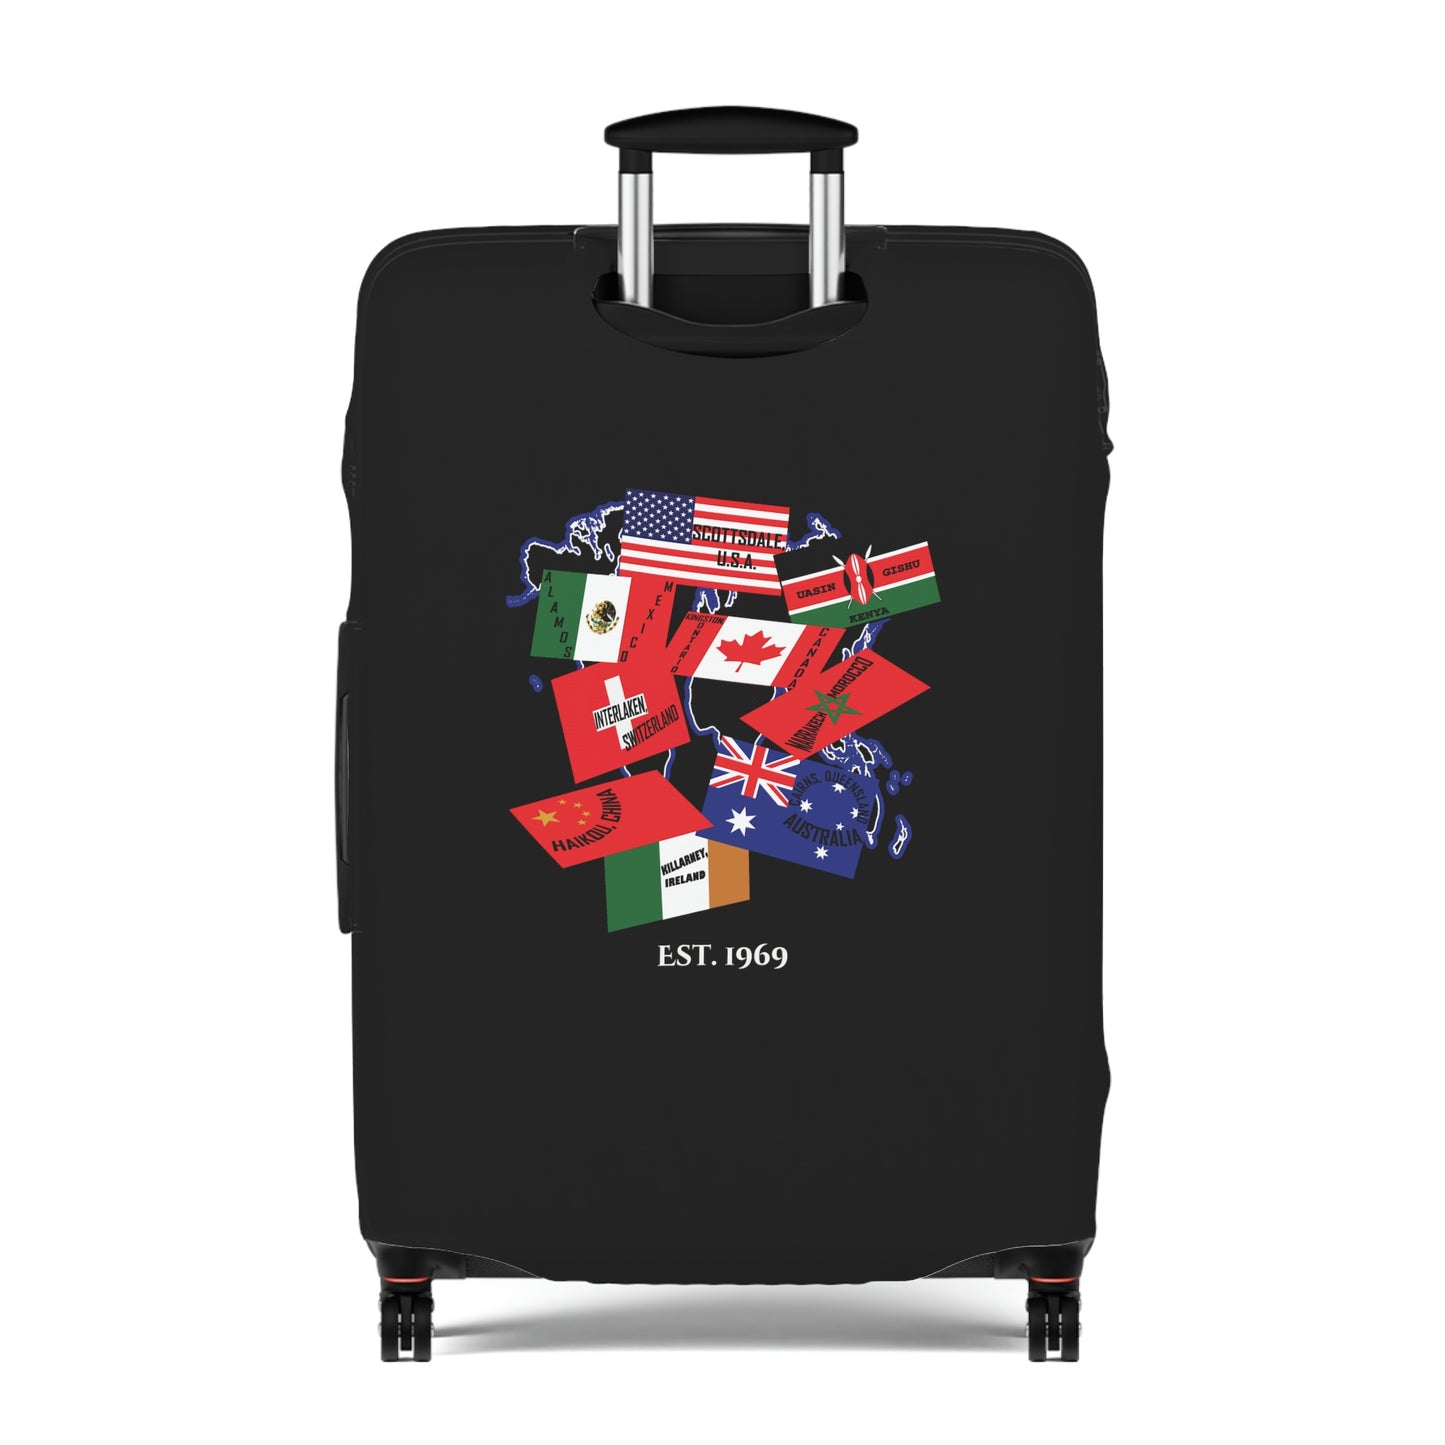 SSCA Student Art Luggage Cover - 3 Sizes